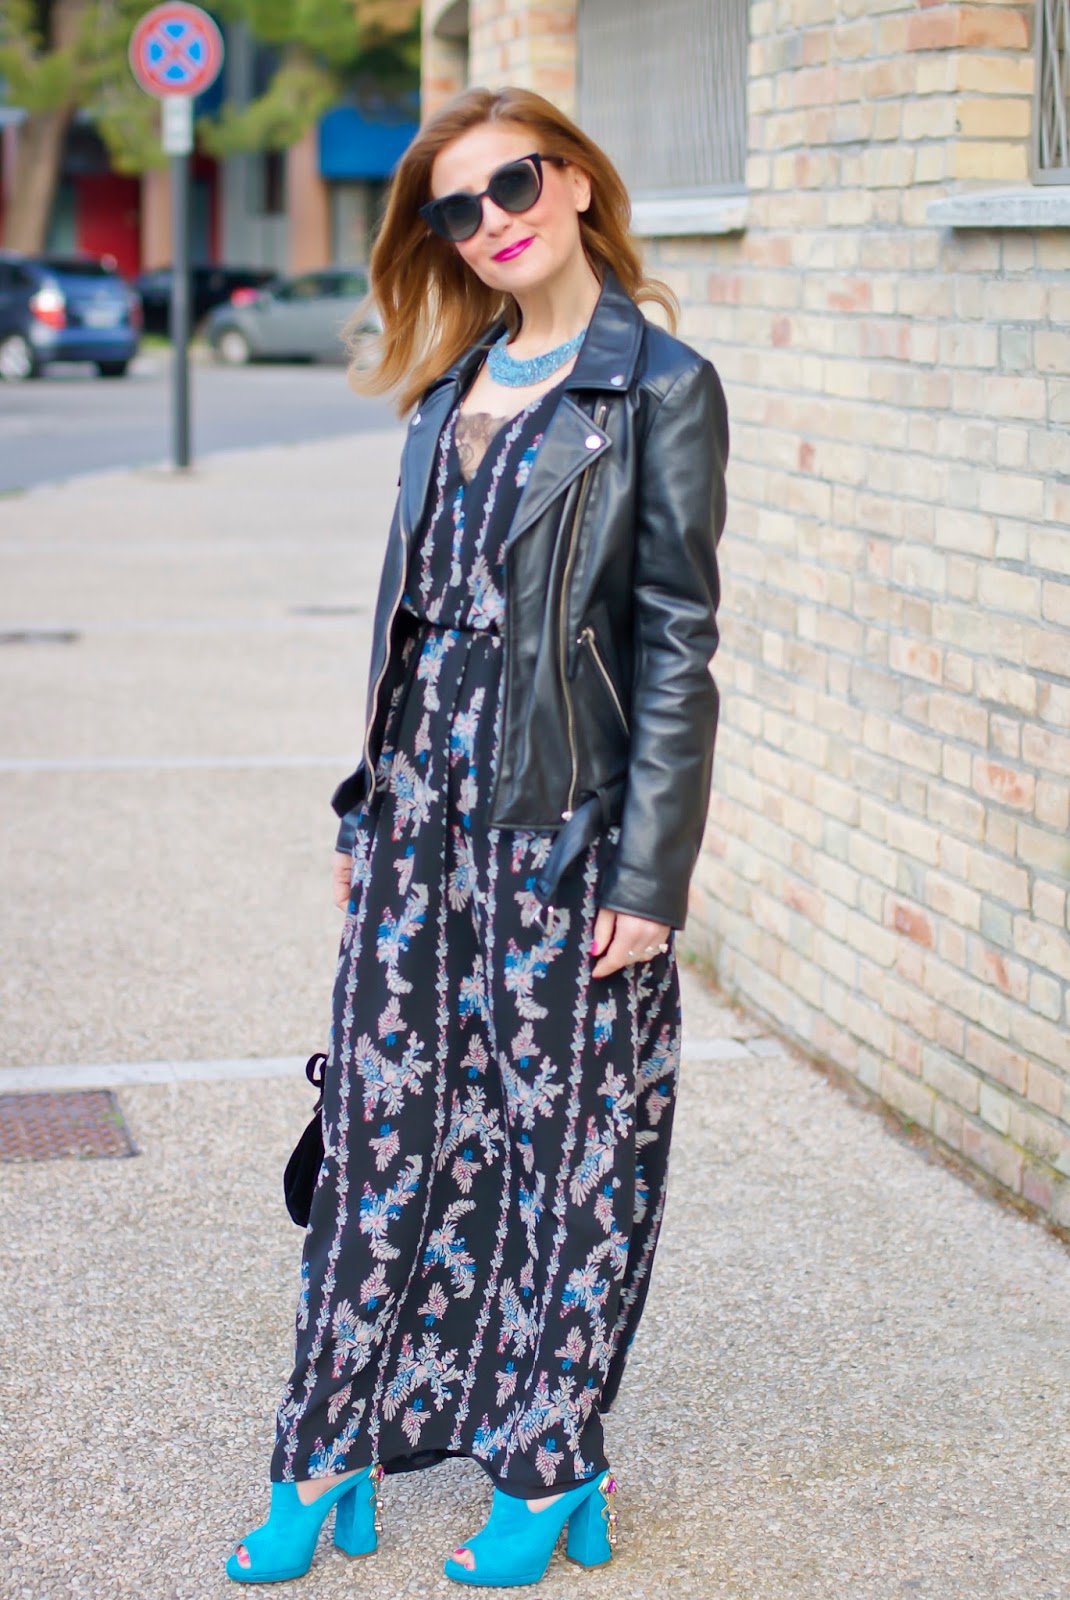 Boho style meets rockstar look with 1.2.3 Paris Babylone dress and Gabriel jacket on Fashion and Cookies fashion blog, fashion blogger style